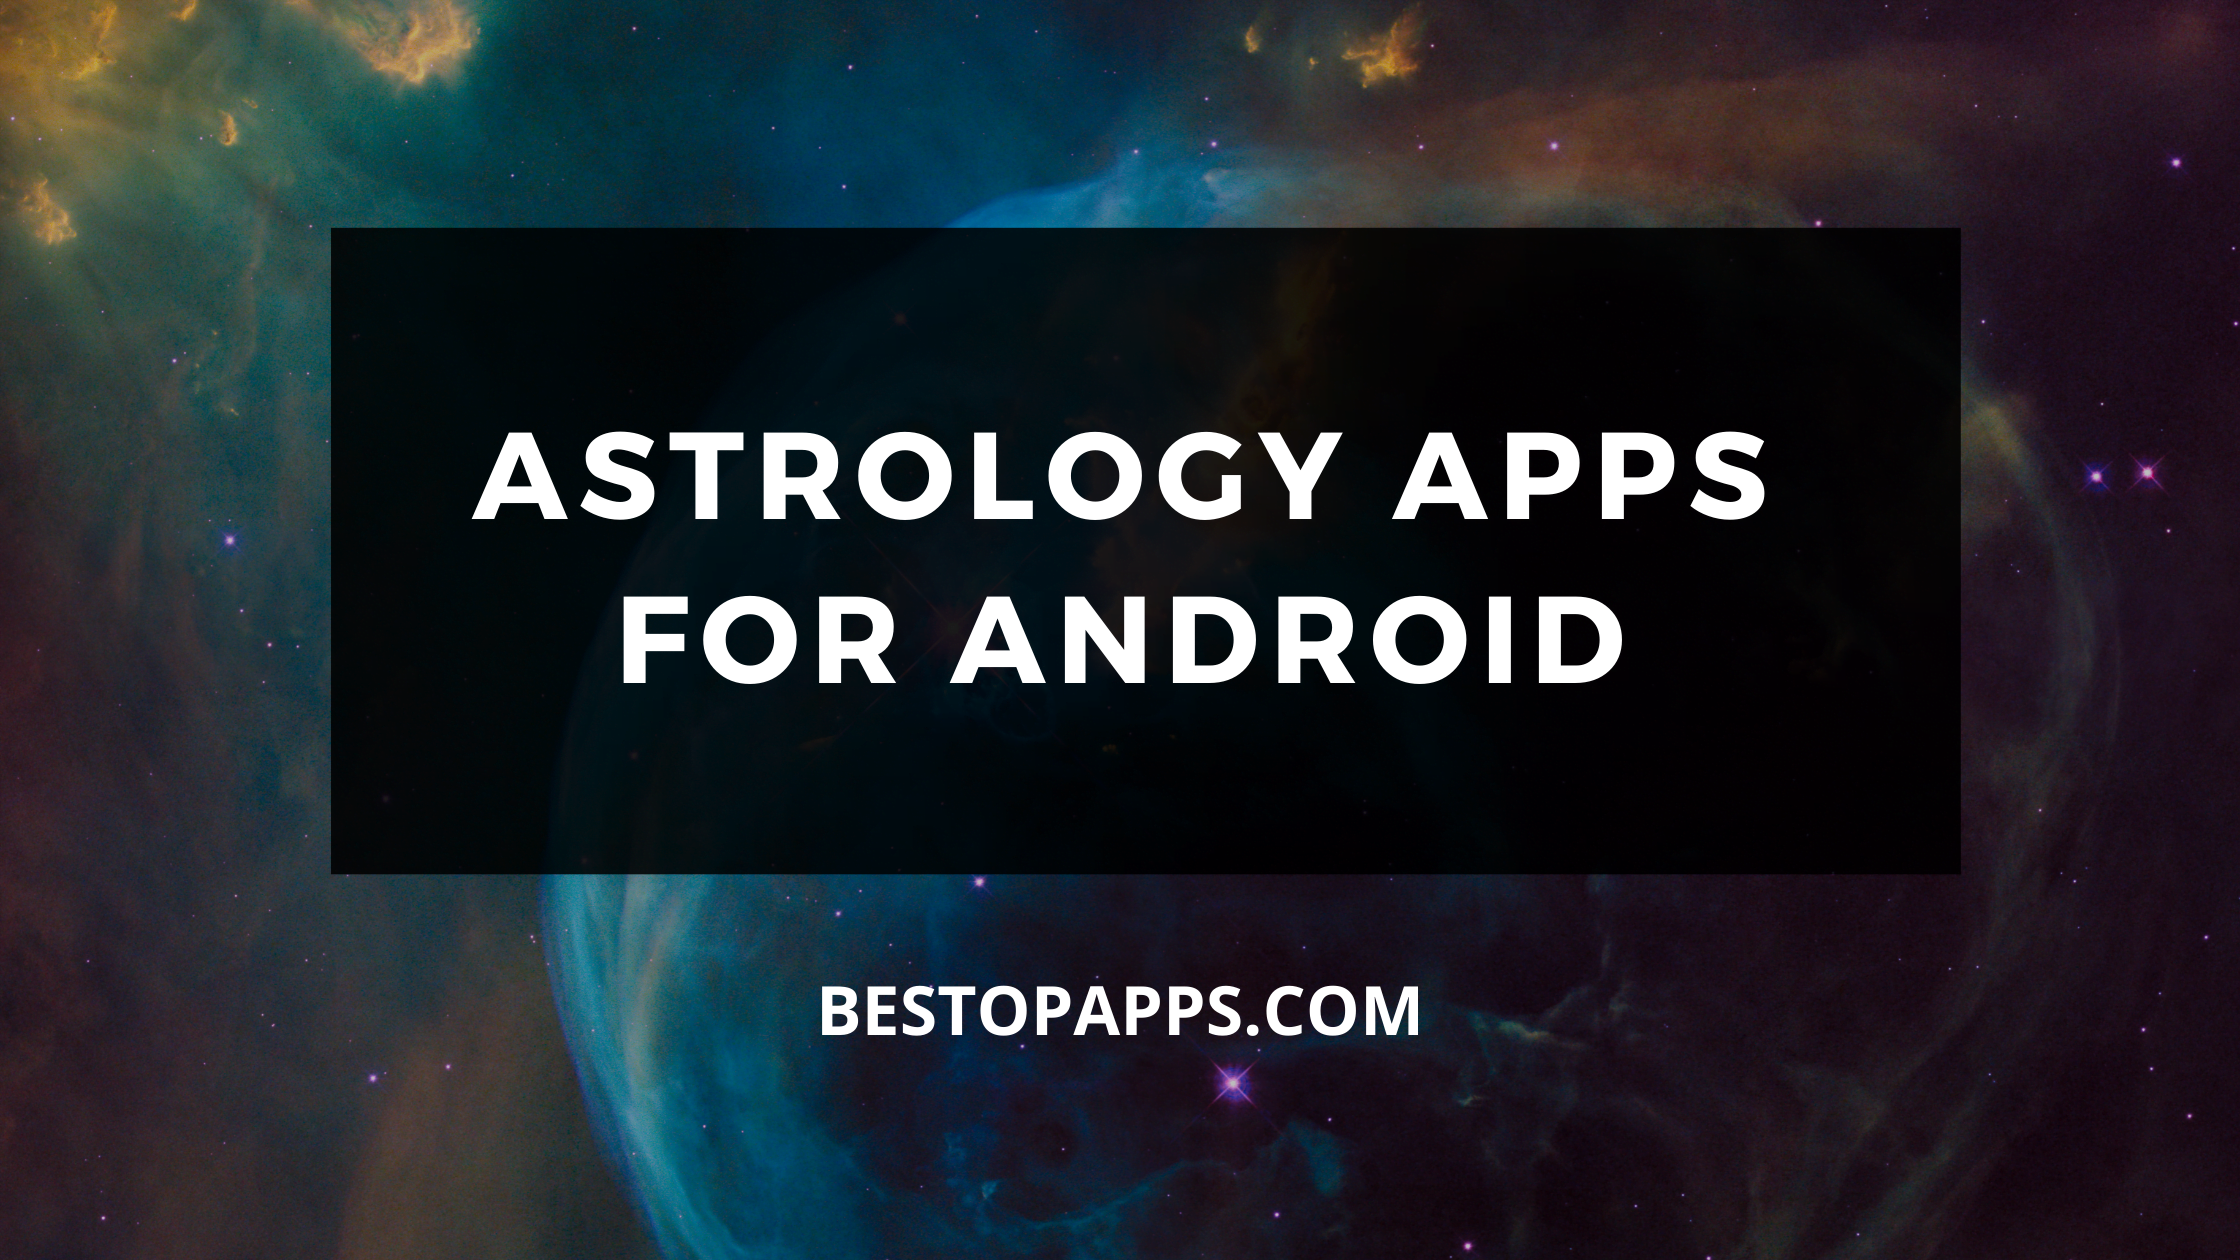 Astrology Apps for Android